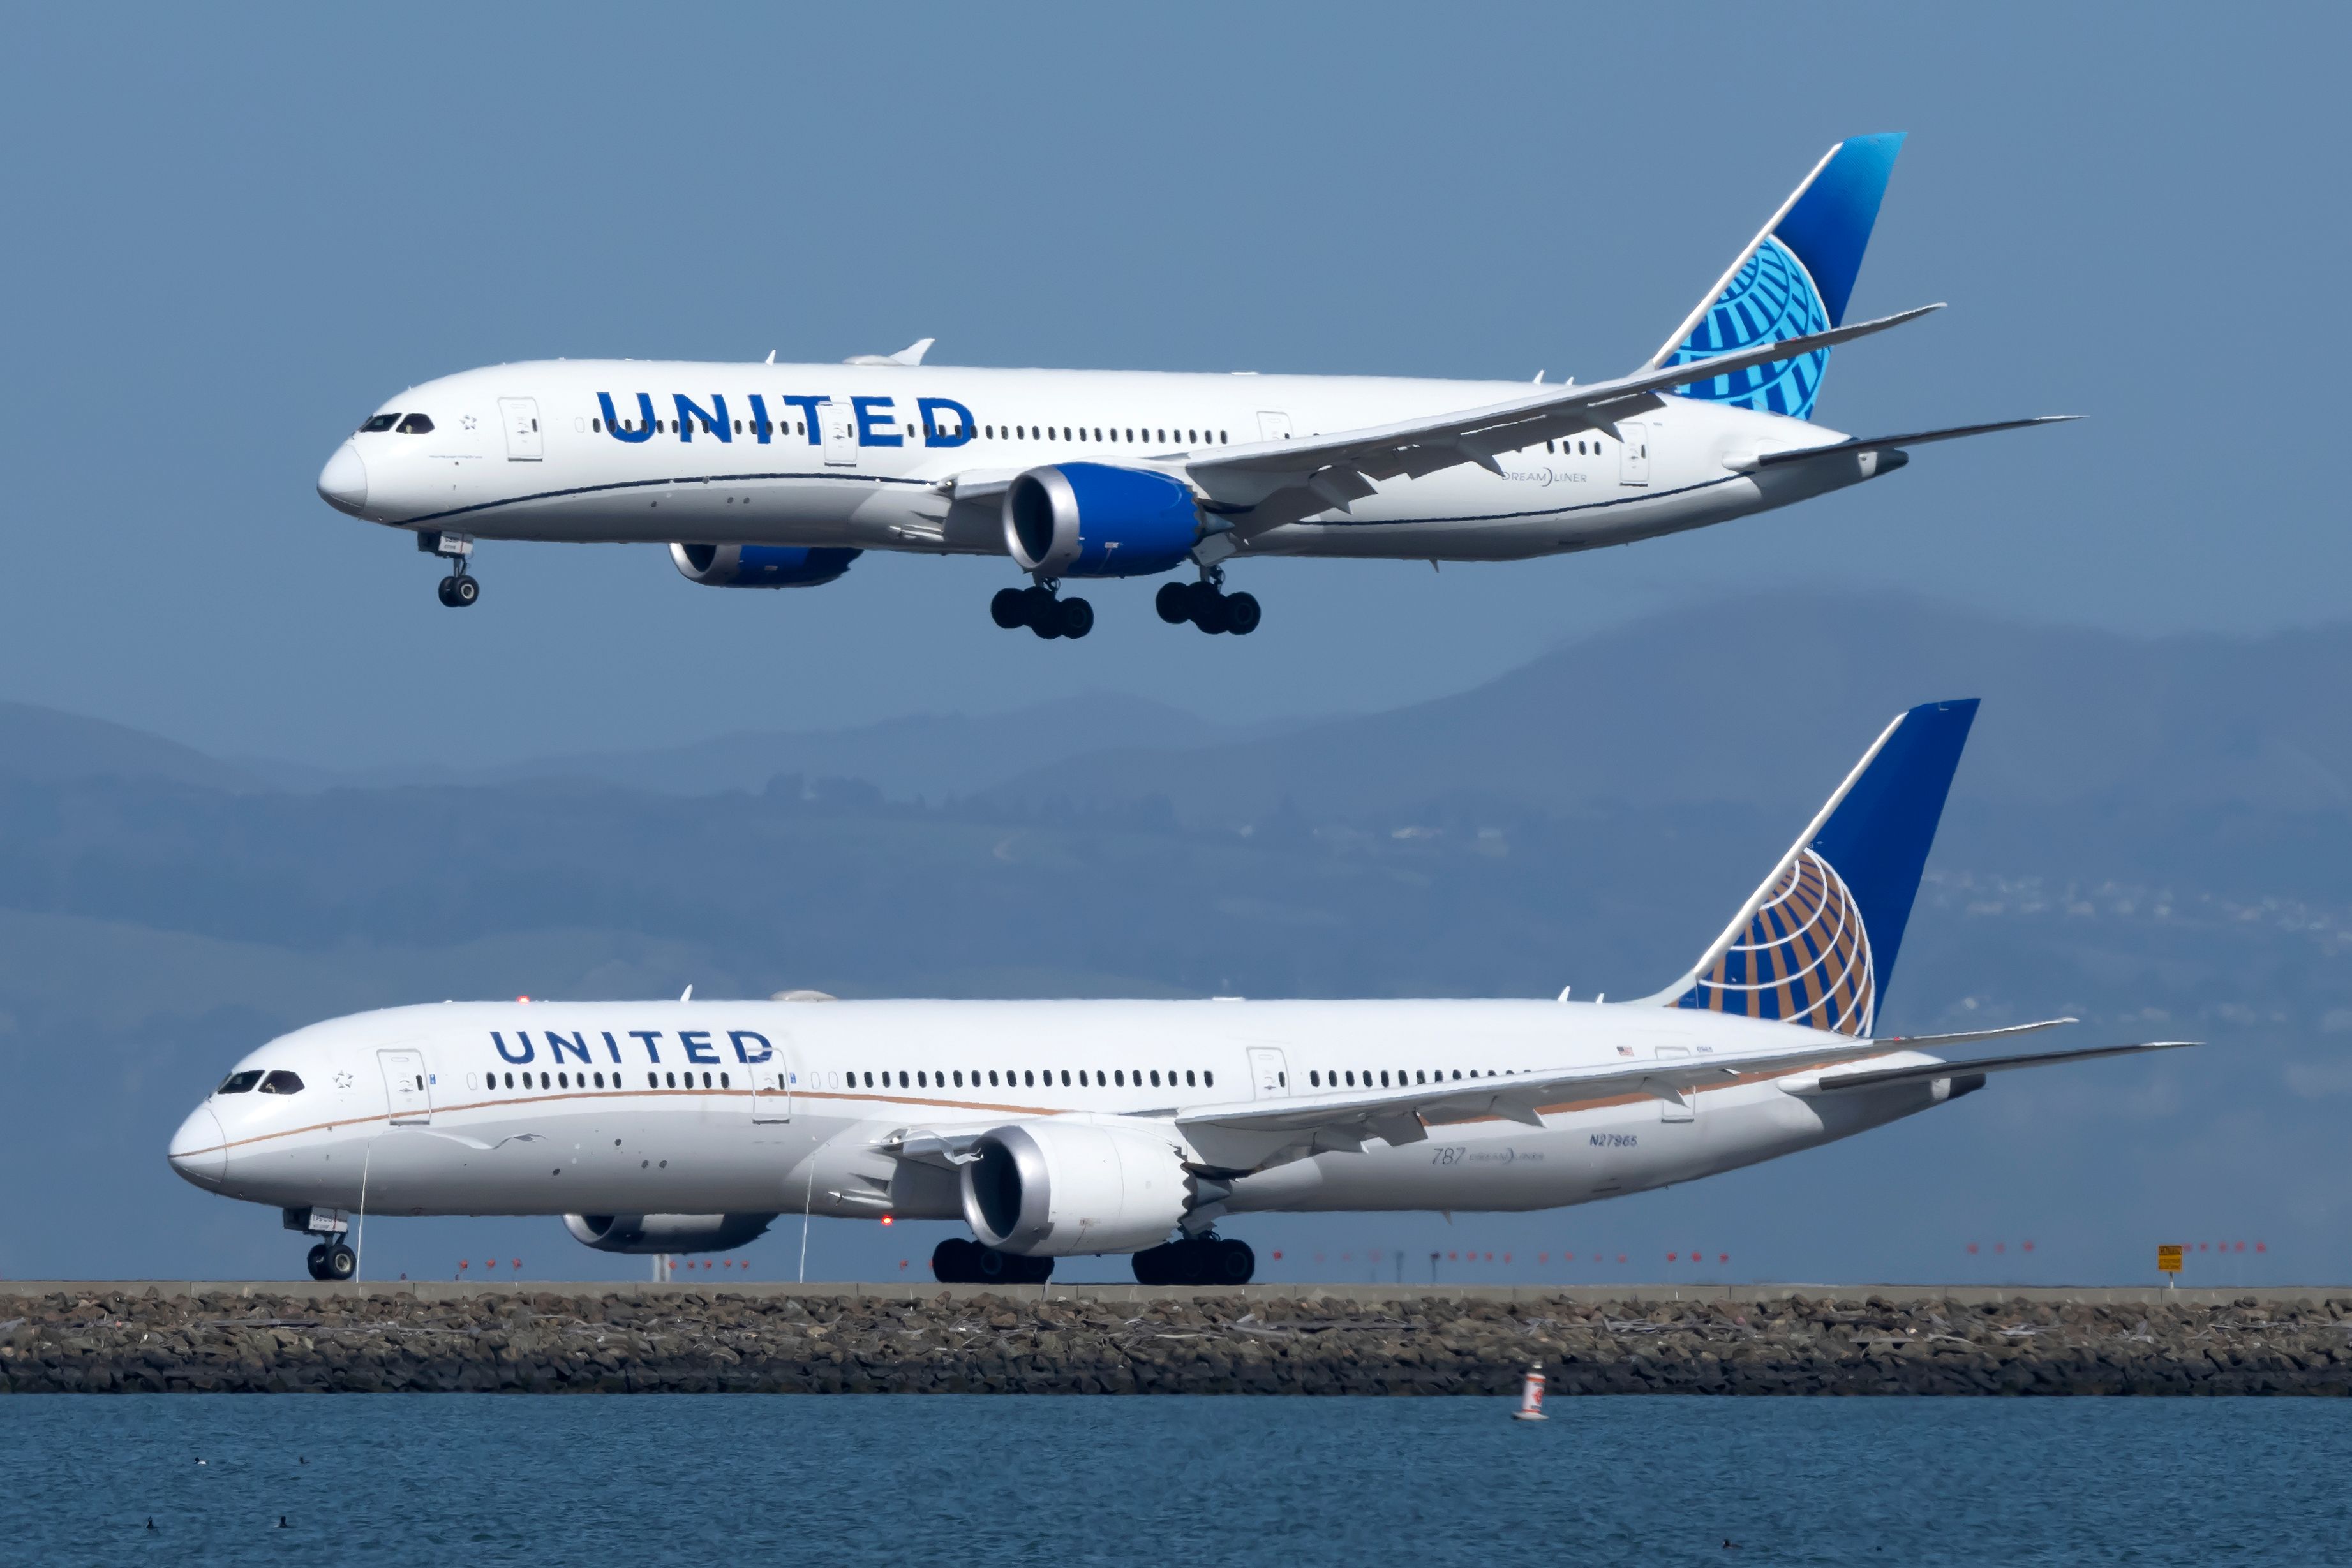 Two United Airlines Boeing 787 Dreamliners, one on the apron and one in the sky.